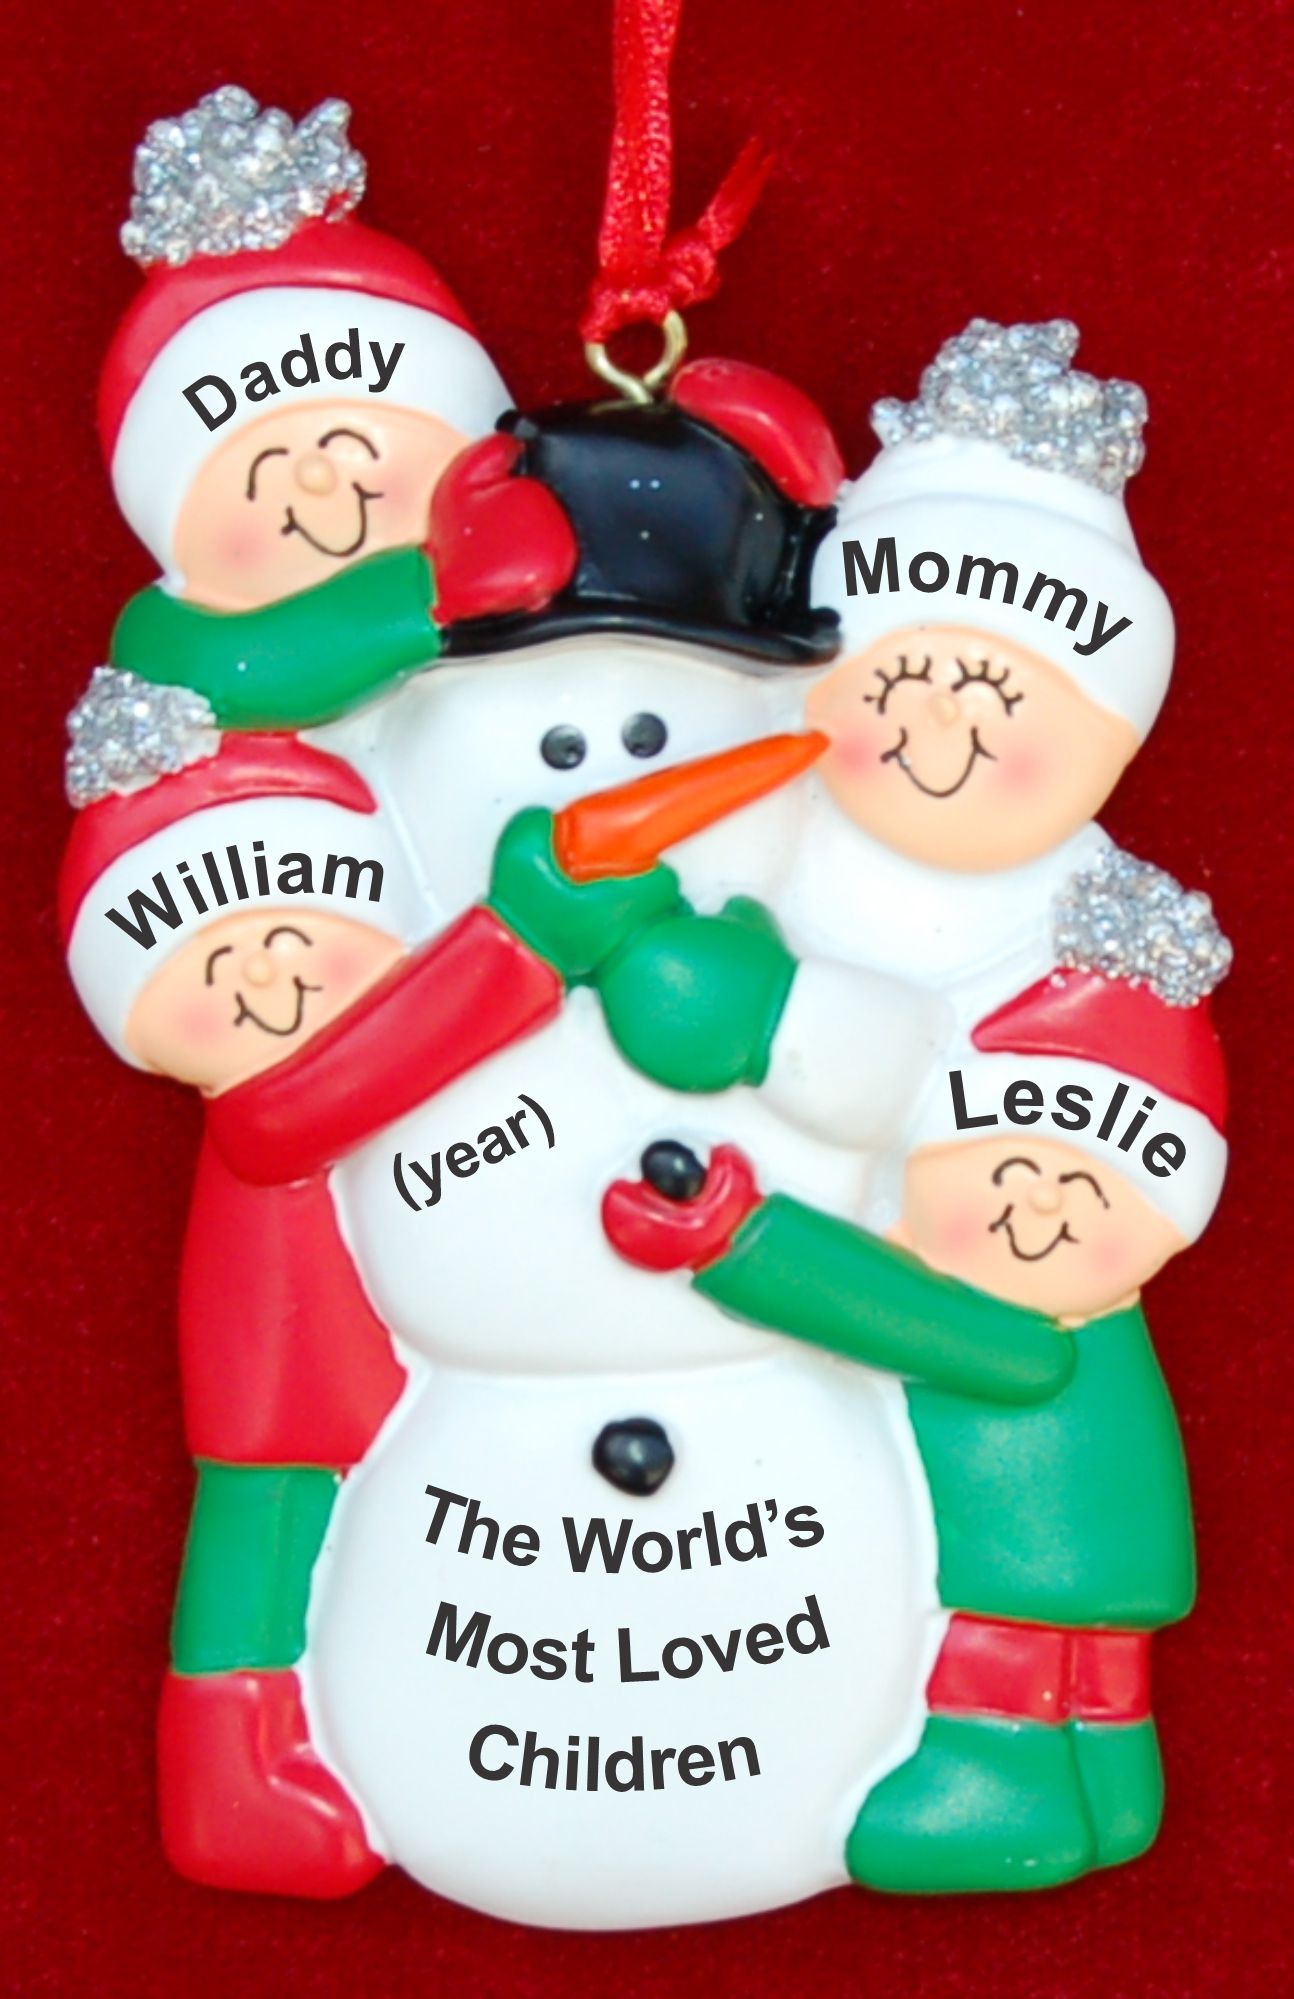 Adoption Christmas Ornament 2 Most Most Wanted Children in the World Personalized by RussellRhodes.com